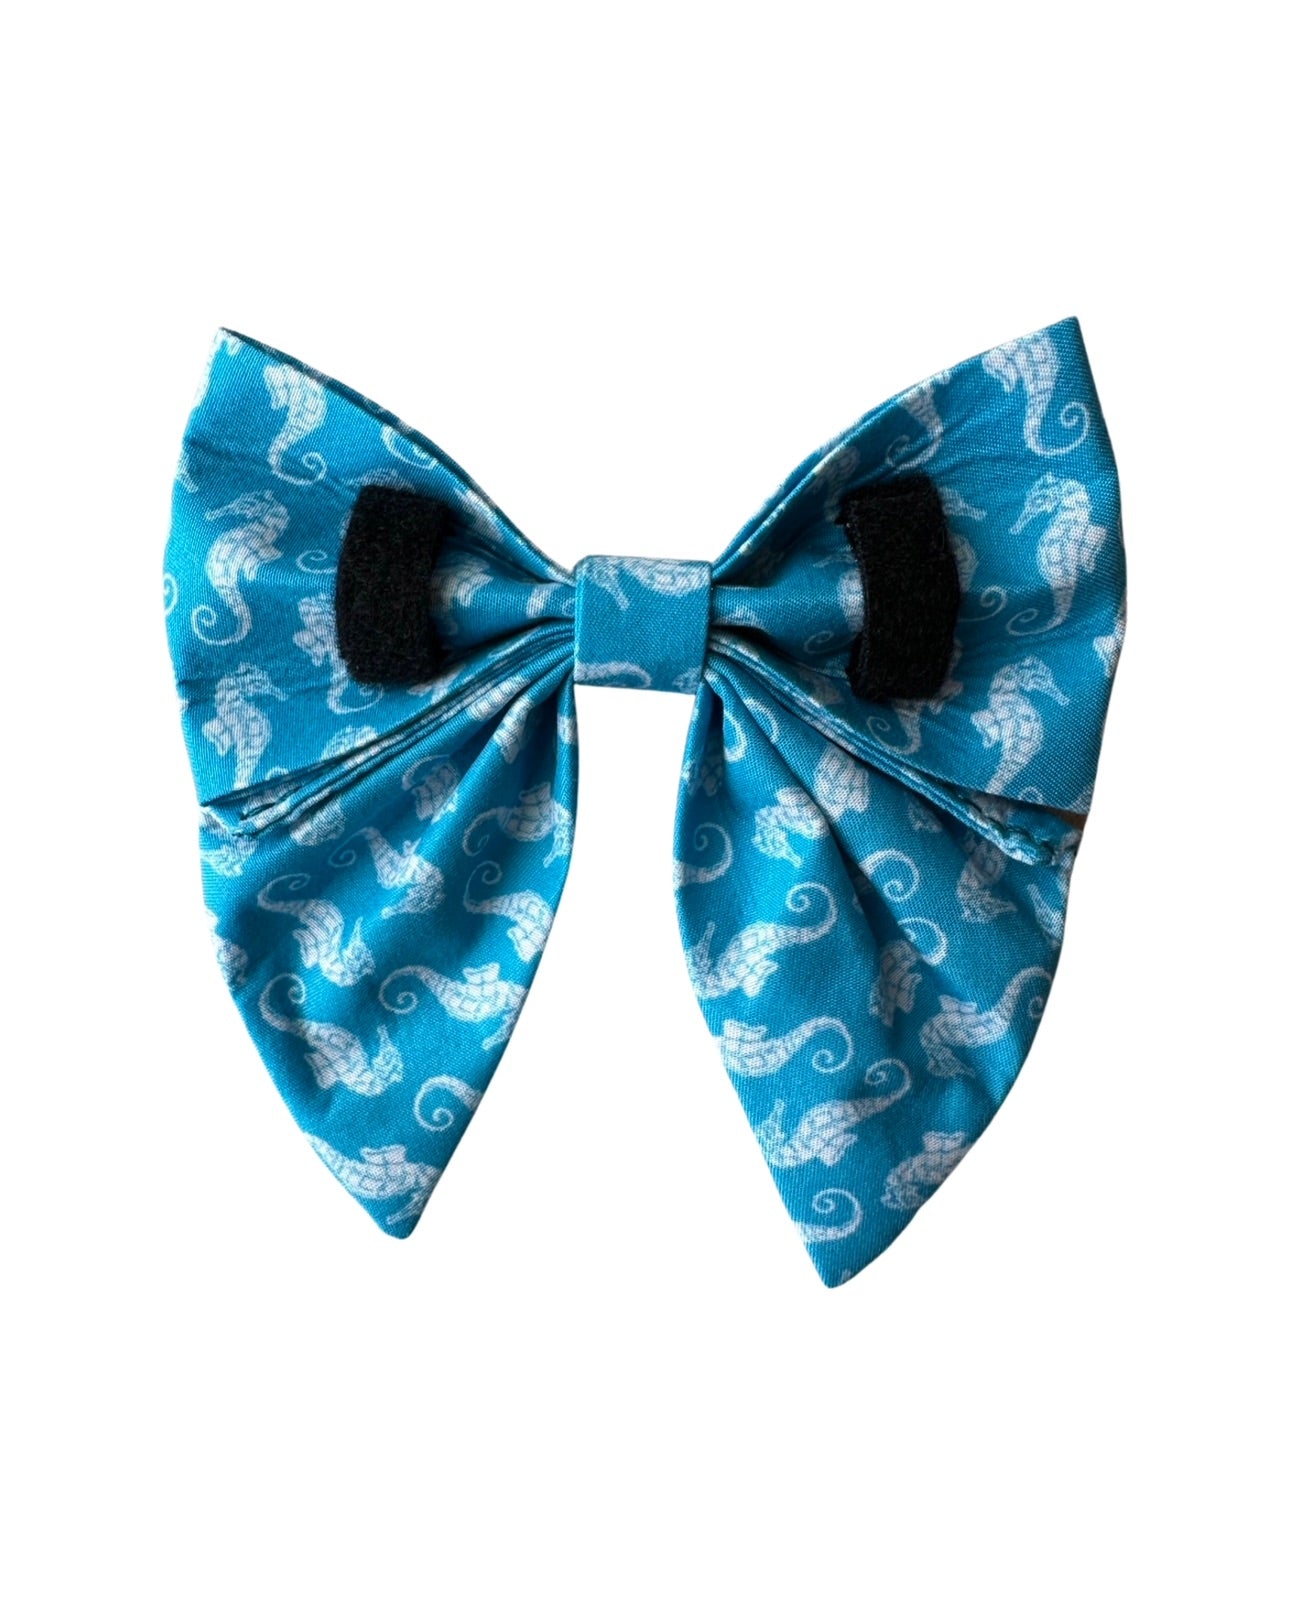 The Party Bow - Maui